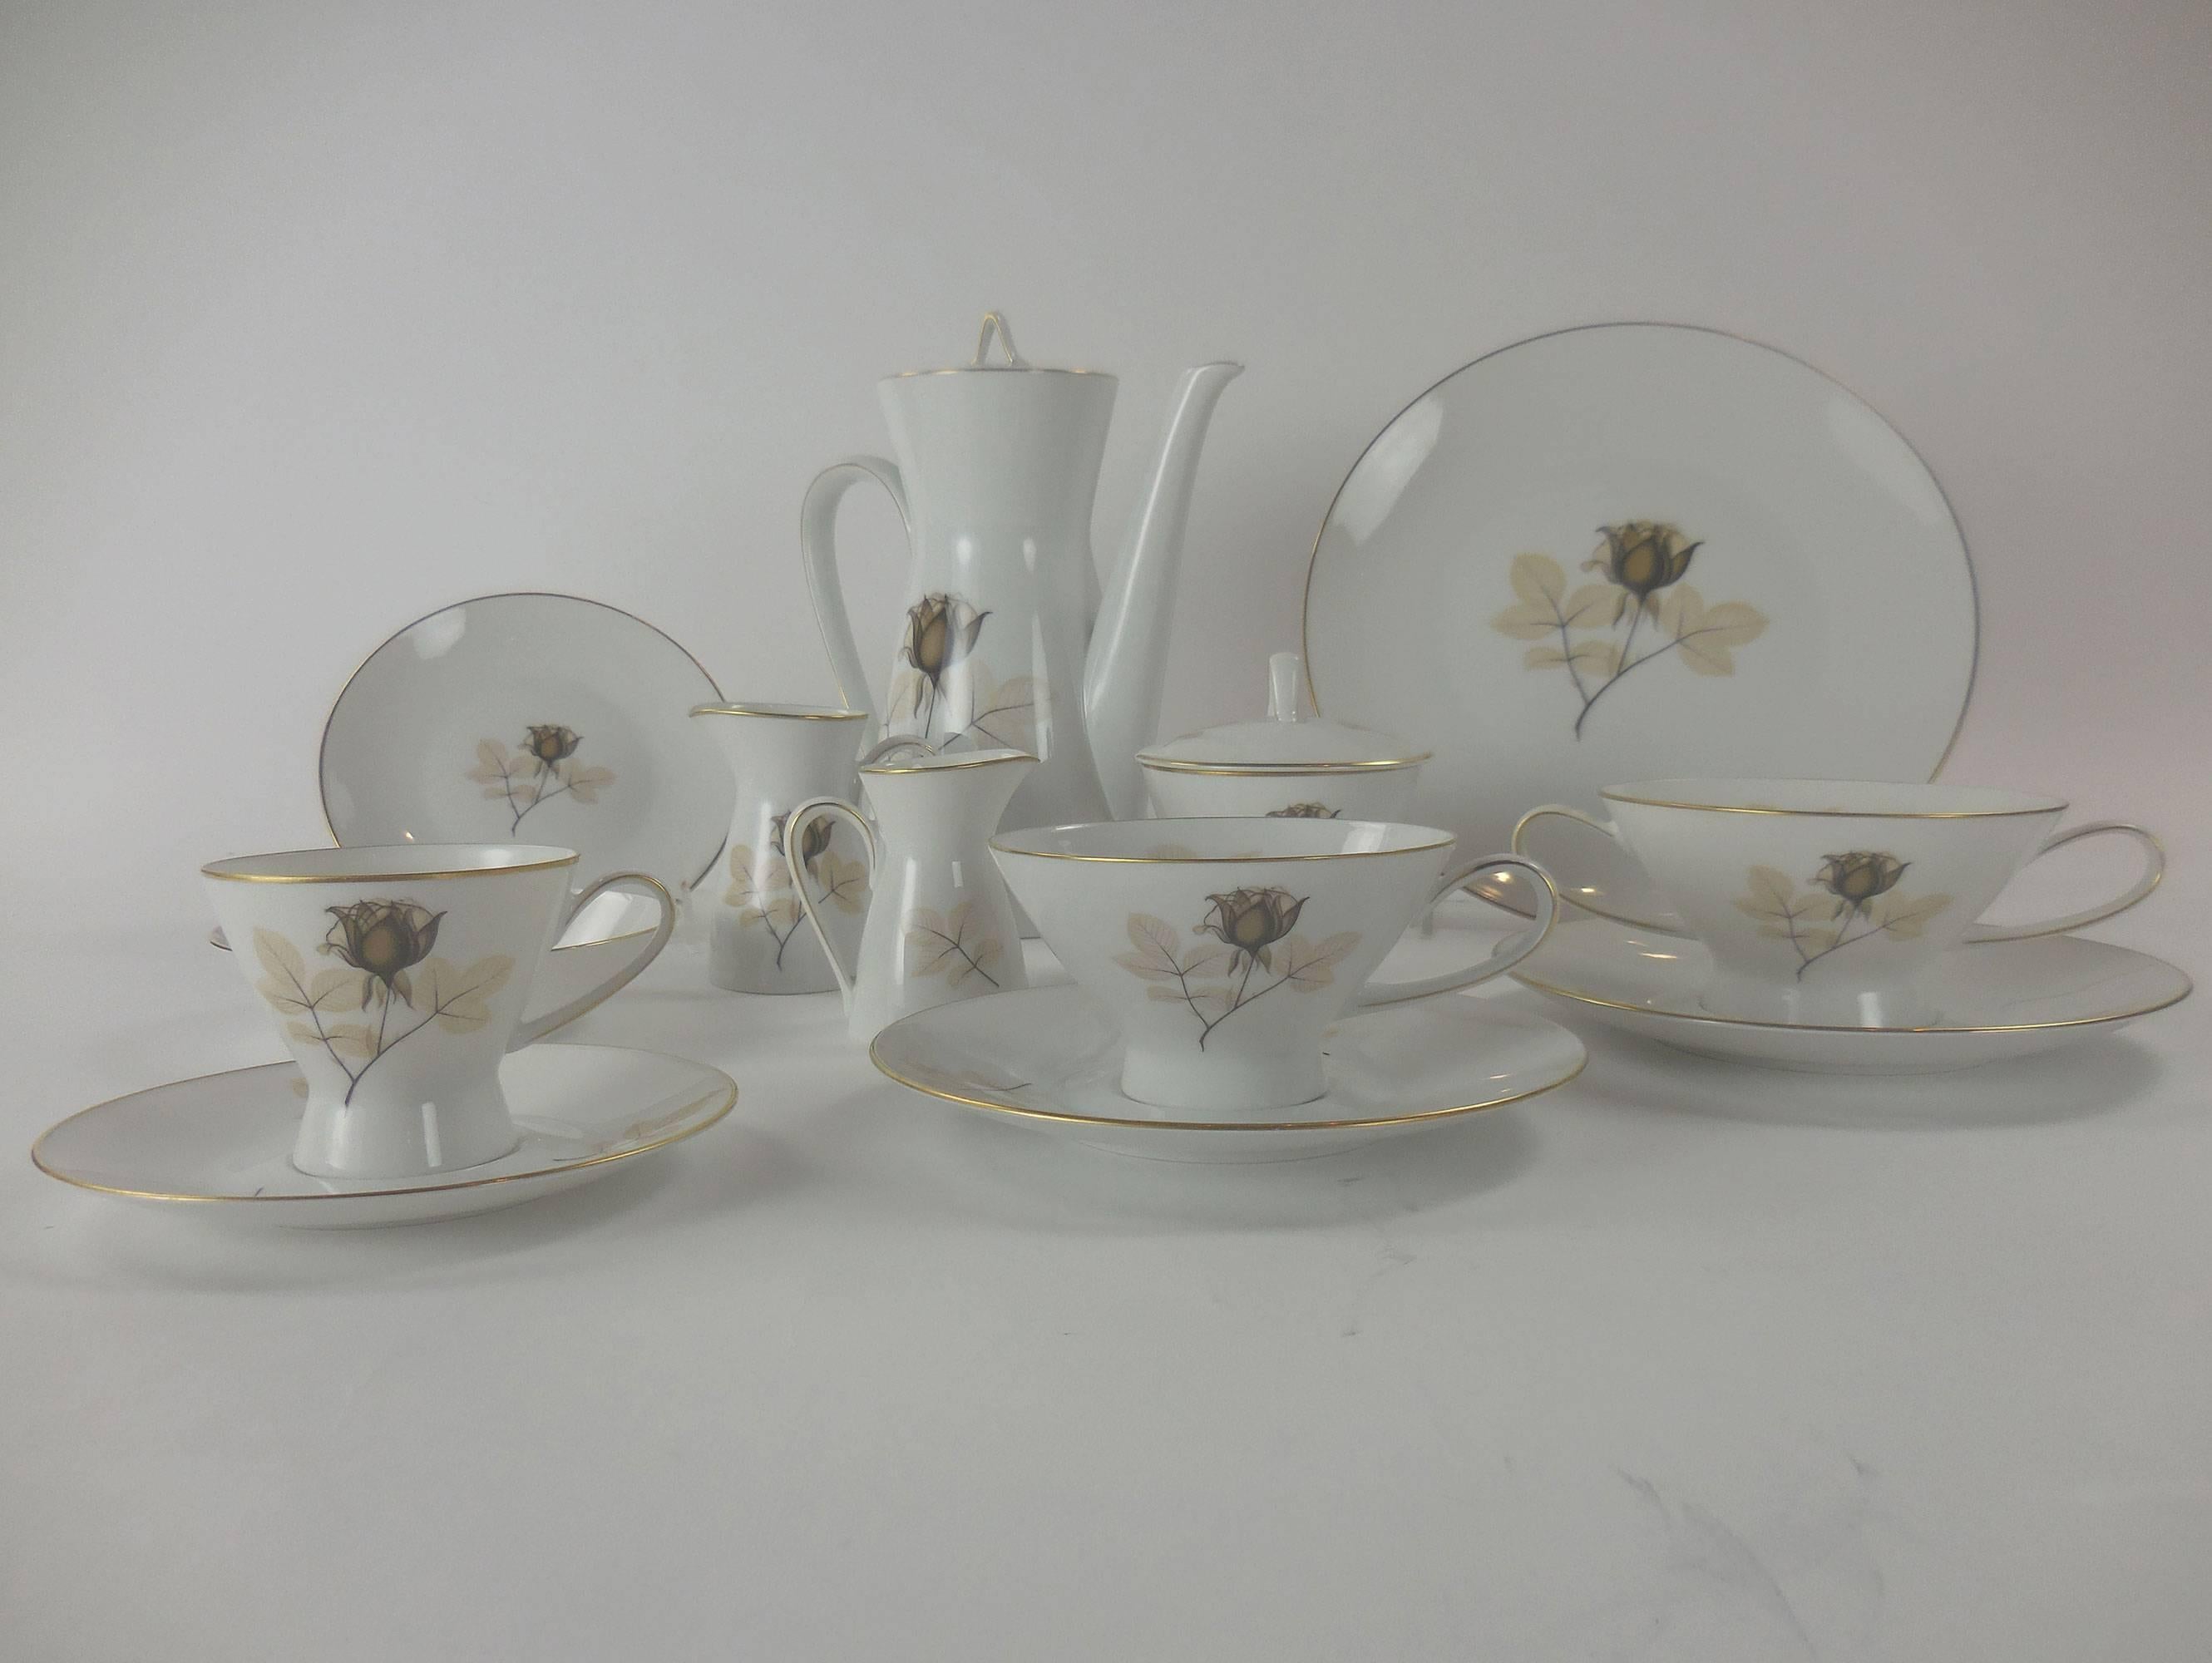 Rosenthal Modernist porcelain dinner service in the desirable Form 2000 design launched by Raymond Loewy in Shadow Rose pattern (1953-1989). The service comprises coffee pot with lid, one sugar bowl and lid (4.5 inches h.), two creamers, eight